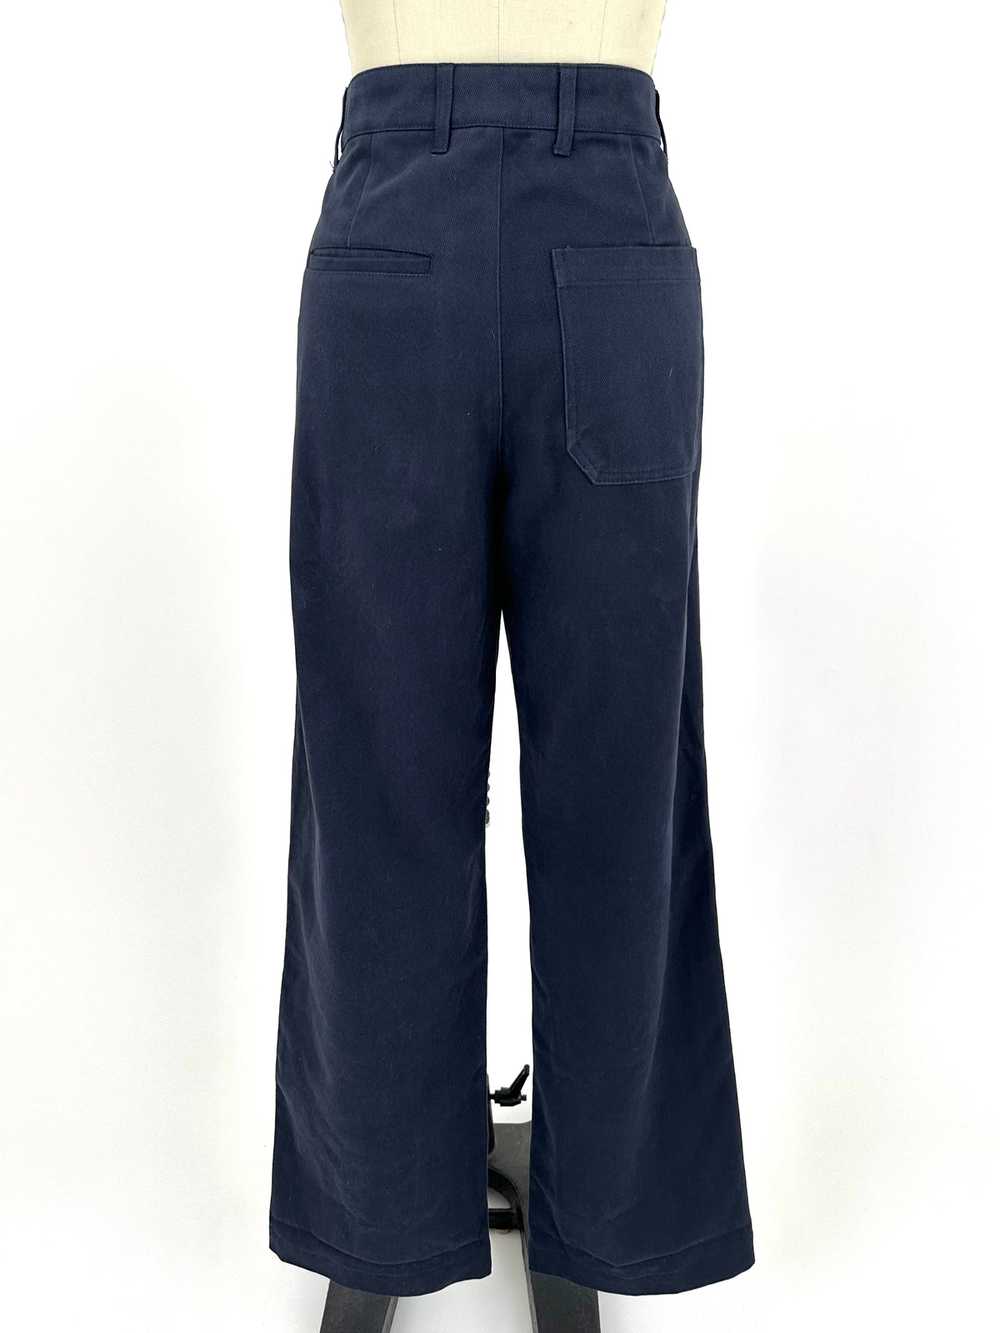 Girls of Dust Brushed Twill Trousers - image 2